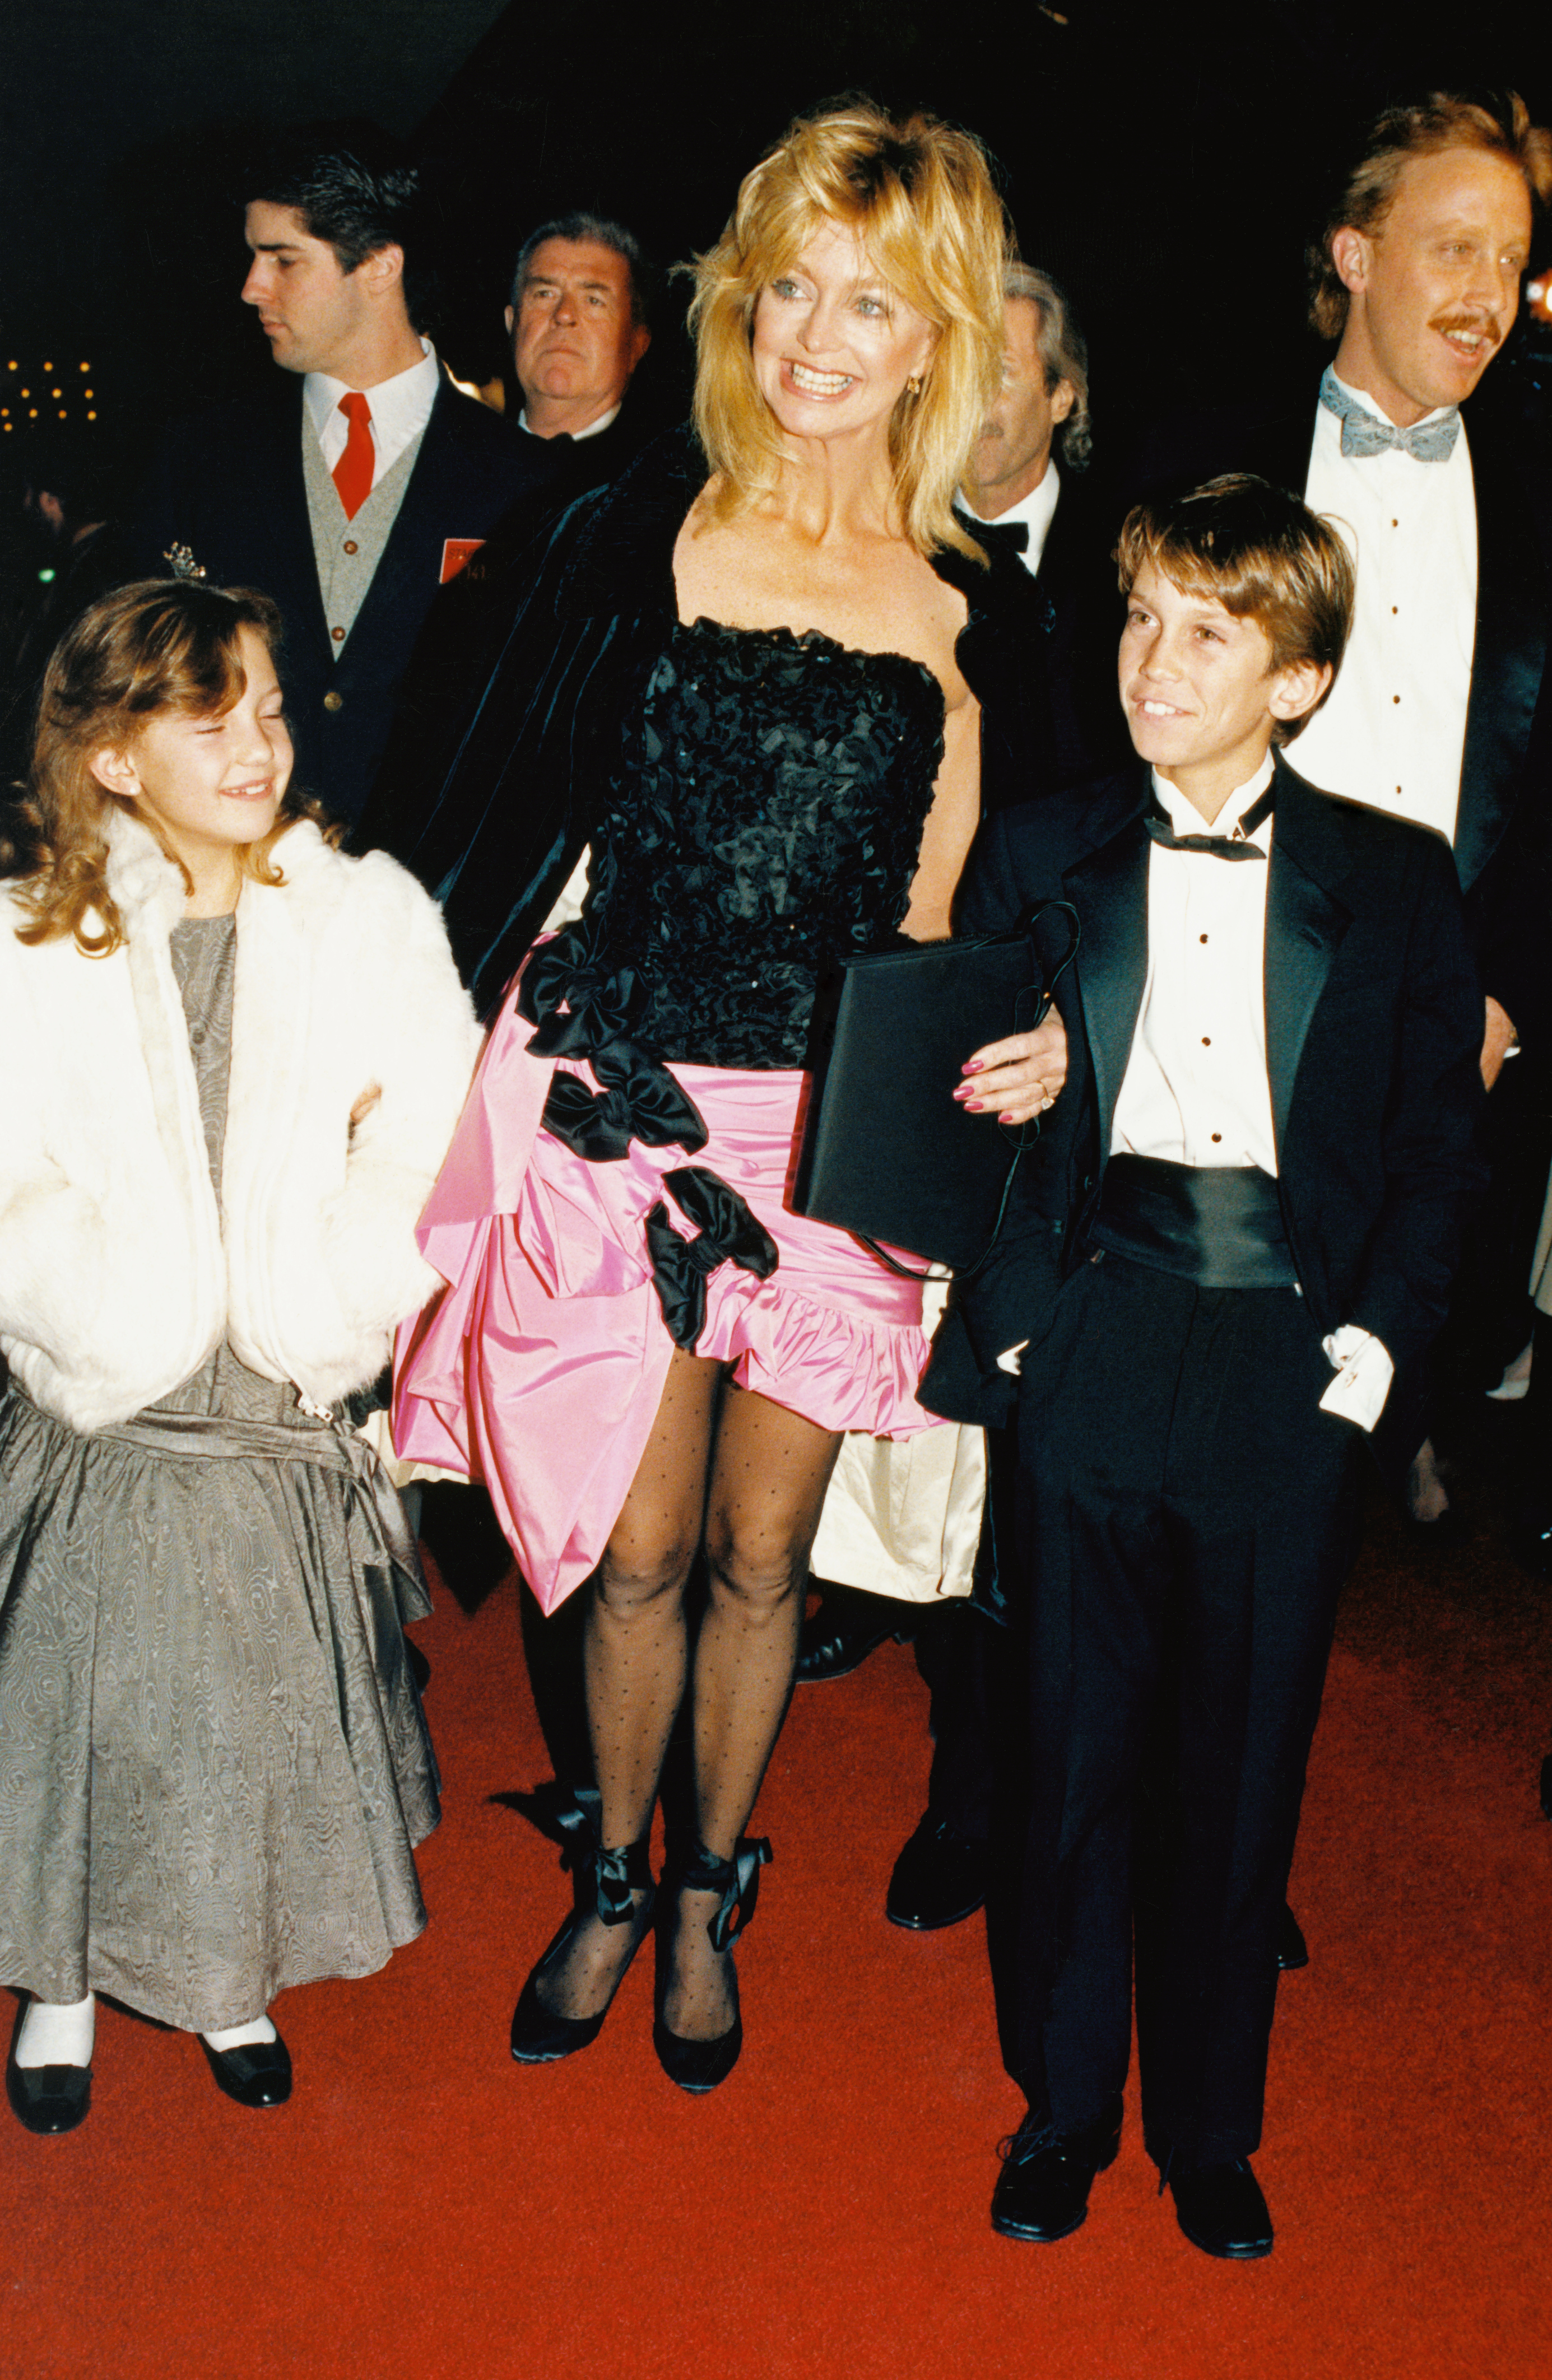 Kate Hudson, Goldie Hawn and Oliver Hudson at the "Overboard" screening in 1987 | Source: Getty Images